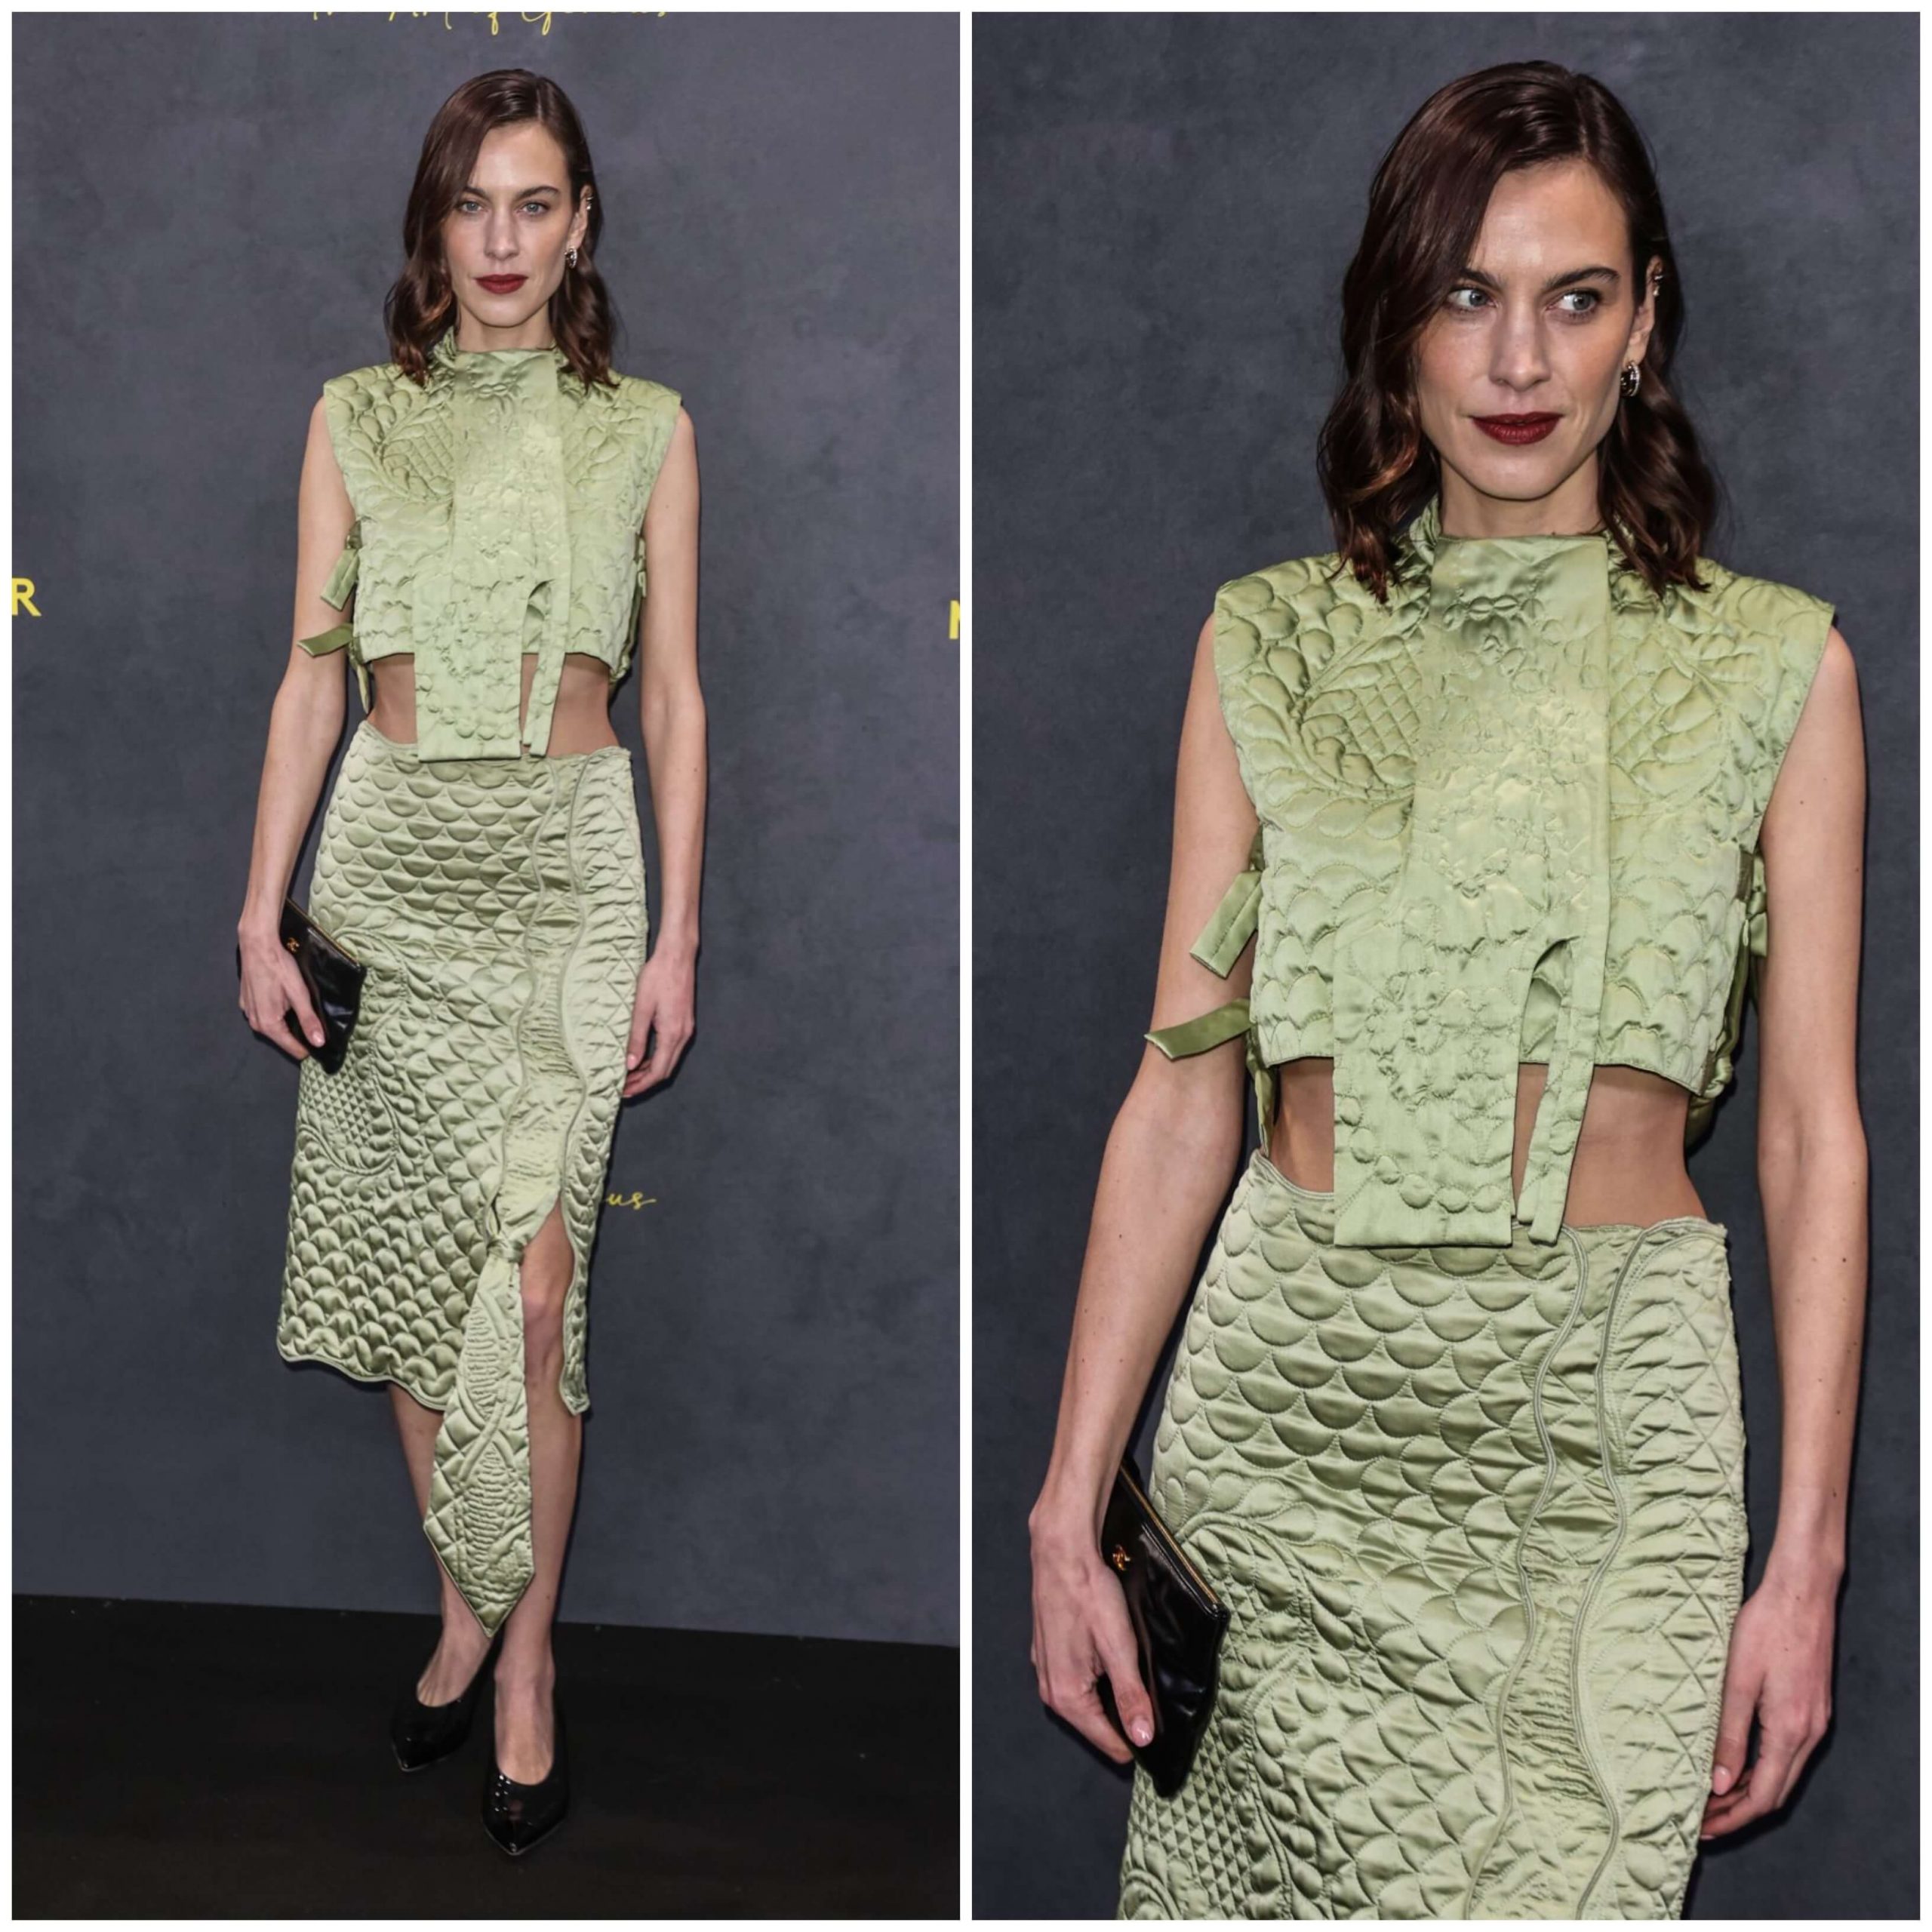 Alexa Chung wears a hot green color skirt outfit In London